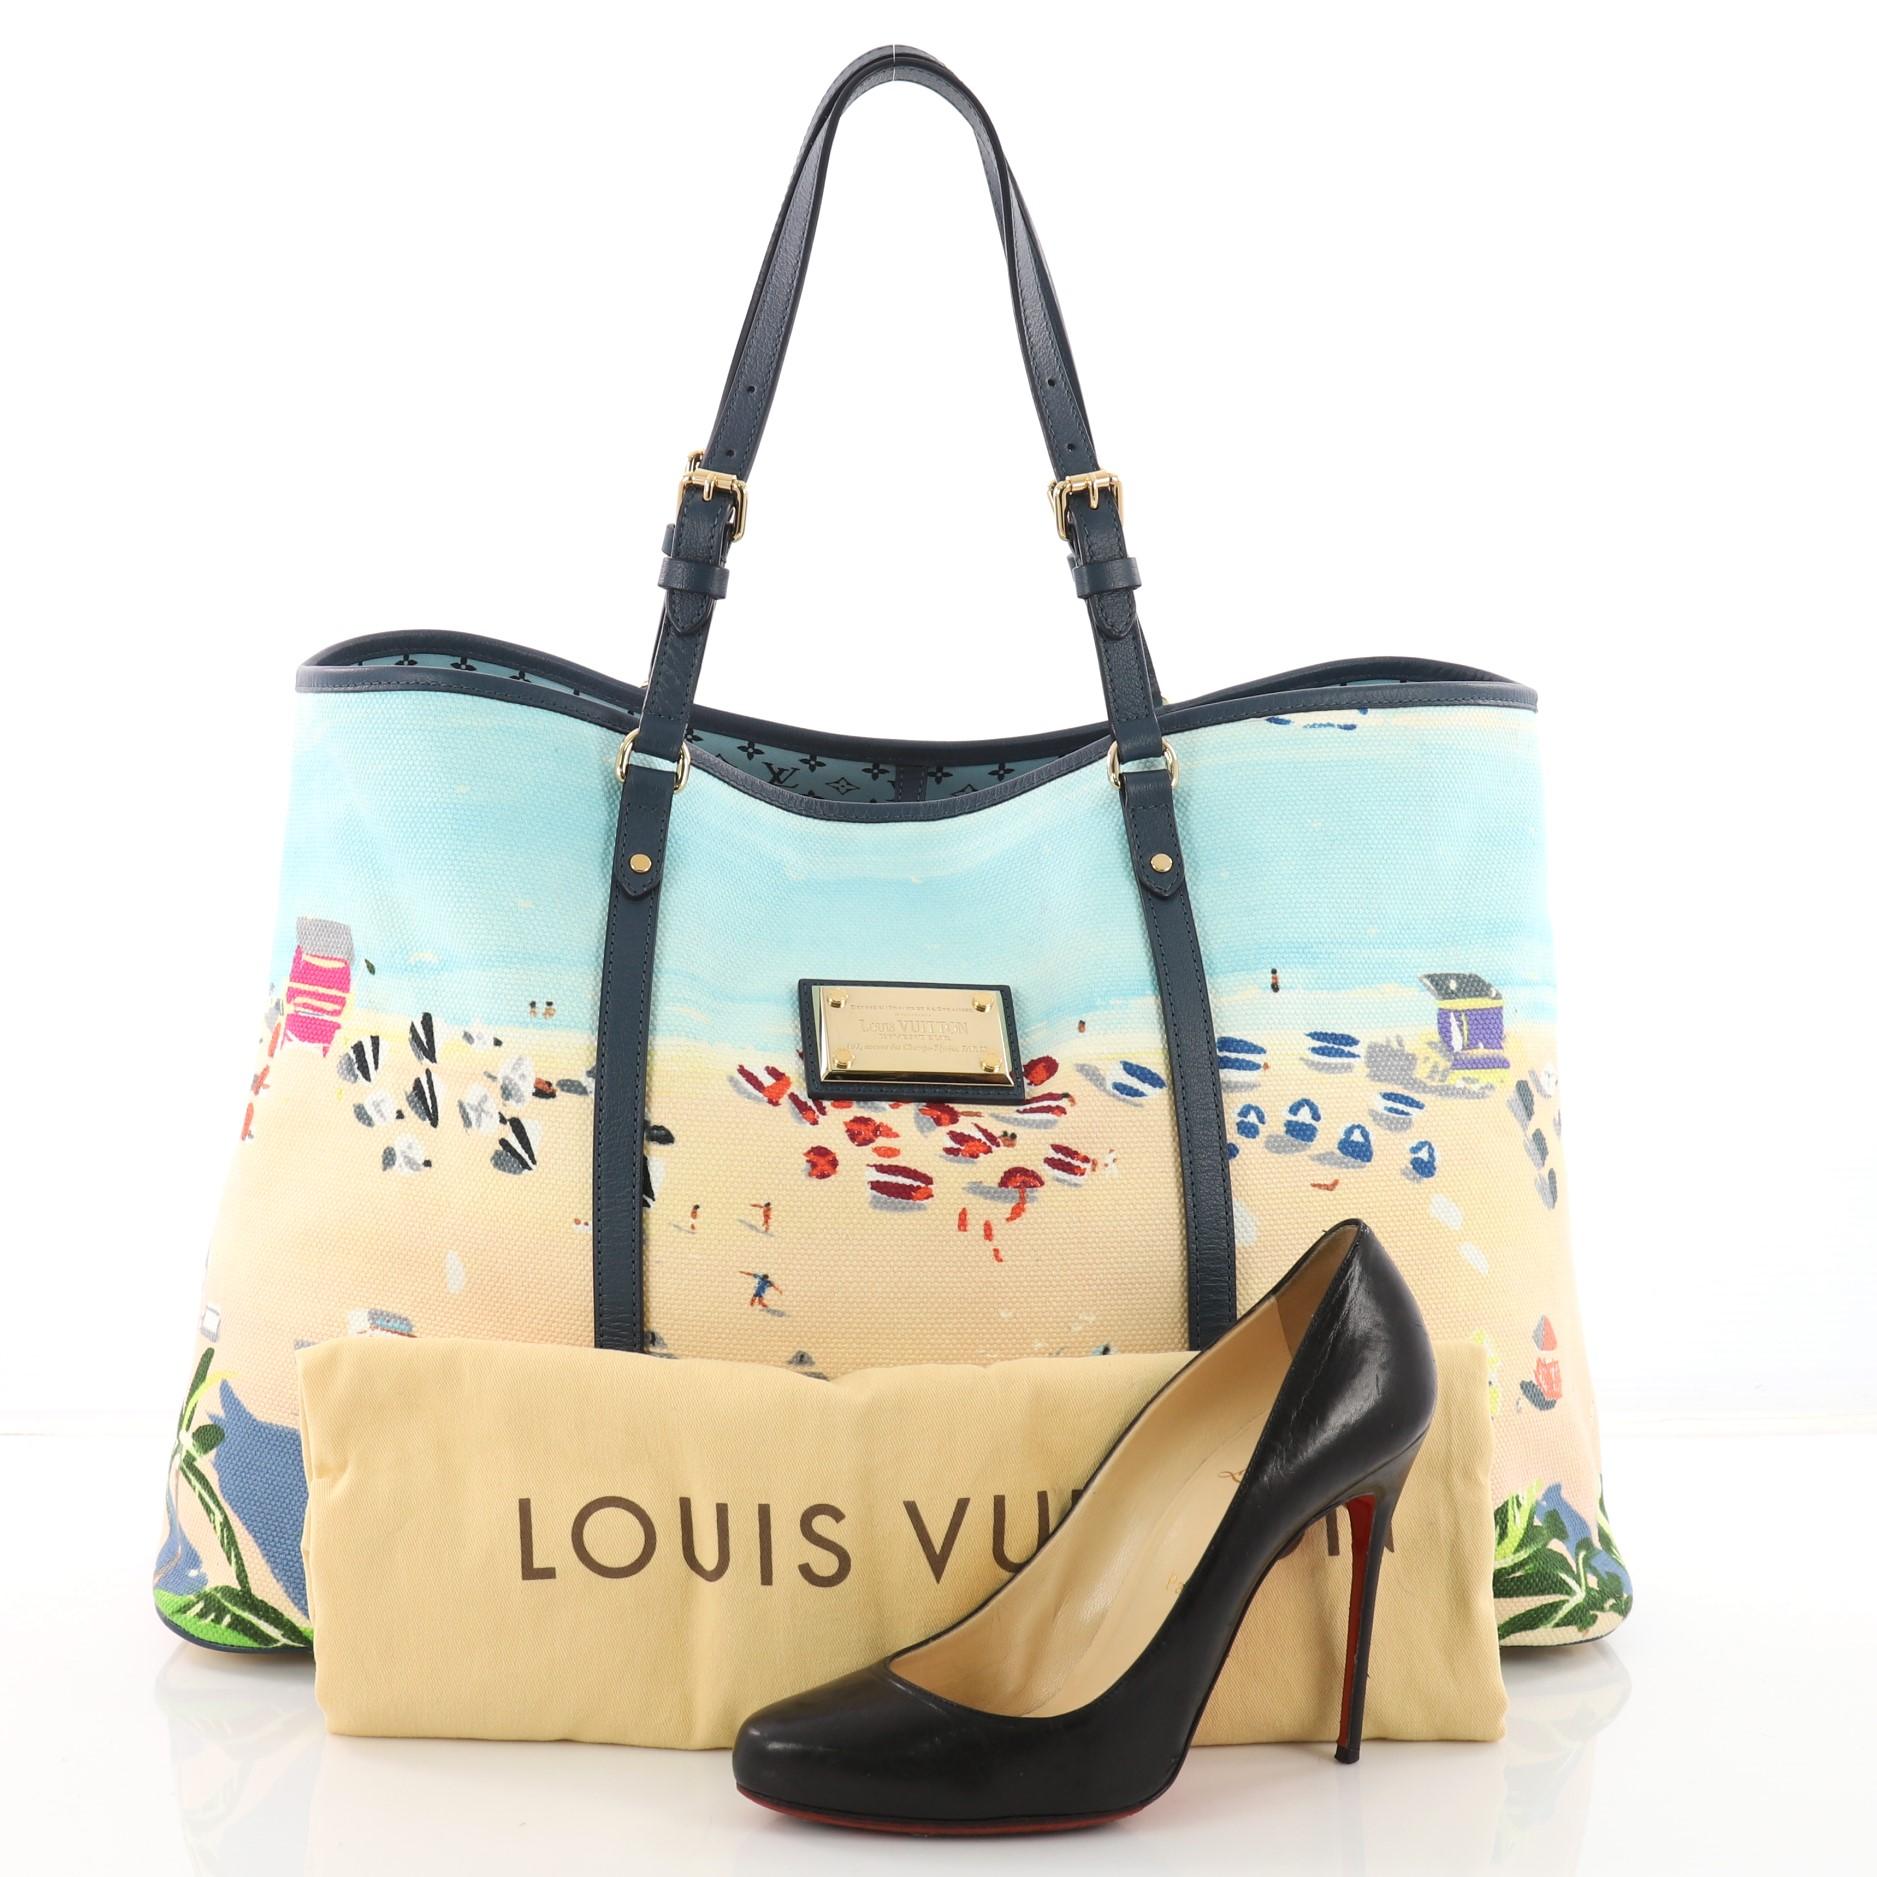 This authentic Louis Vuitton Ailleurs Cabas Limited Edition Printed Canvas GM is inspired by the eternal allure of white sand, turquoise sea and lazy hours spent reading under a brightly colored beach umbrella. Crafted from blue printed canvas, this